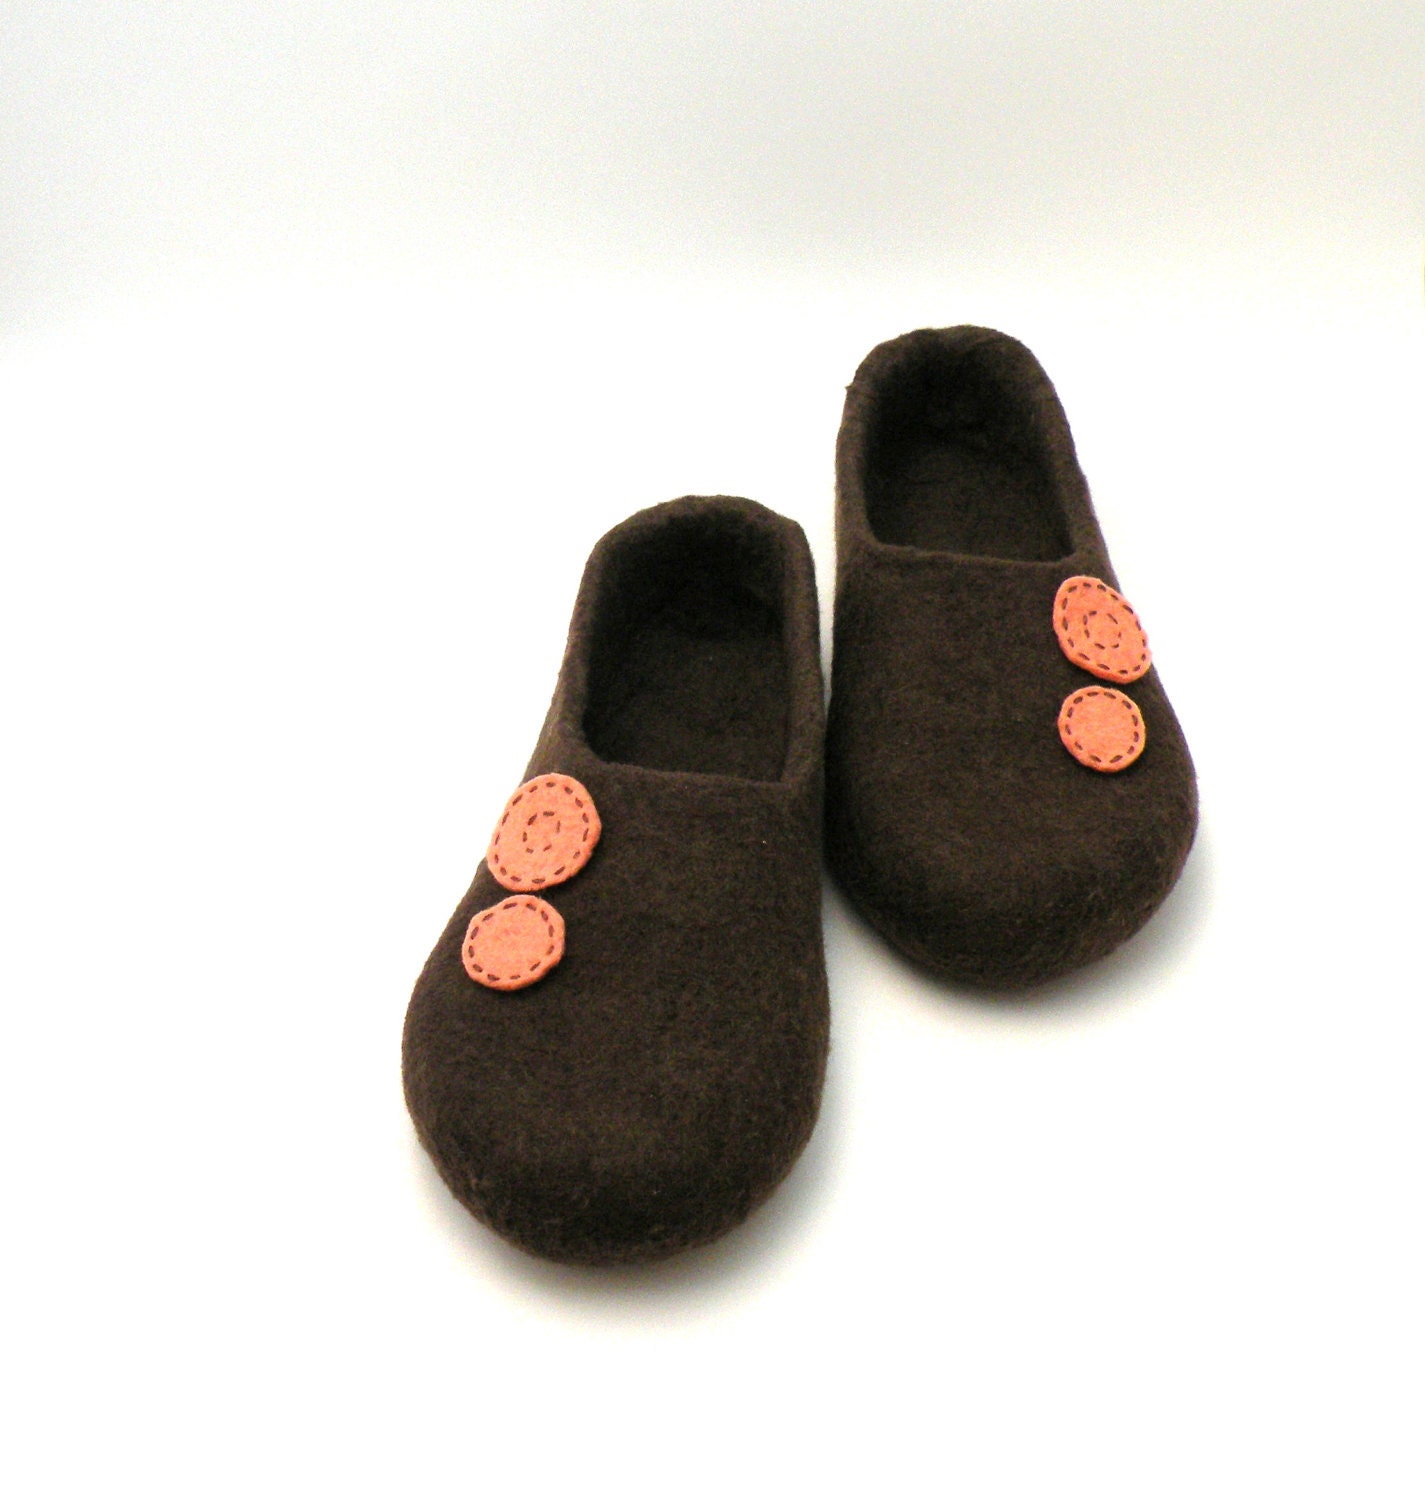 Felted wool slippers Brown and peach -  made to order - autumn fall winter fashion - wool clogs - cozy home shoes - AgnesFelt